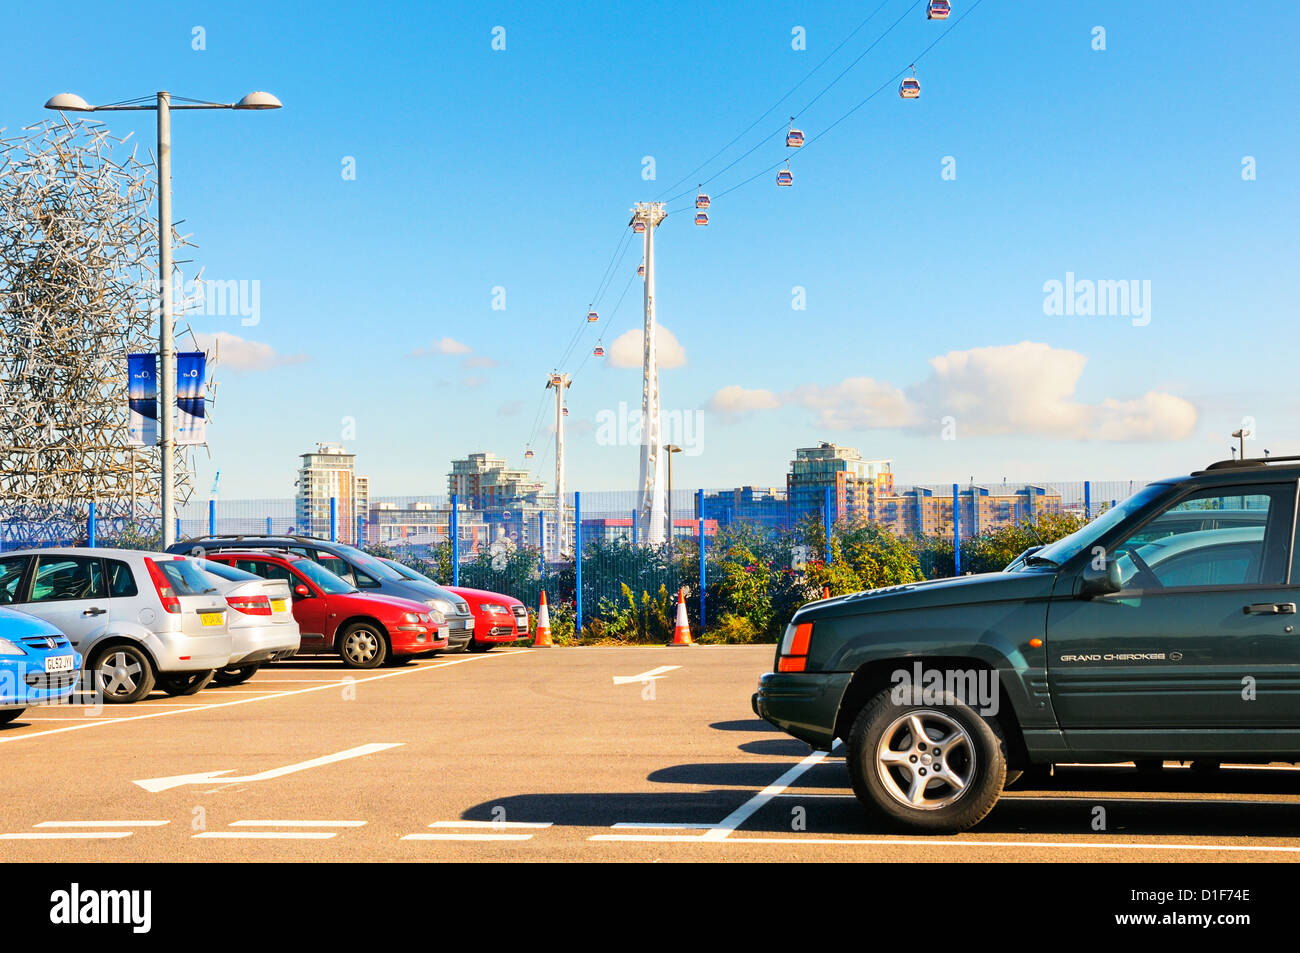 Emirates Air Line cable cars dominating the skyline on the Greenwich Peninsula, North Greenwich, London, UK Stock Photo